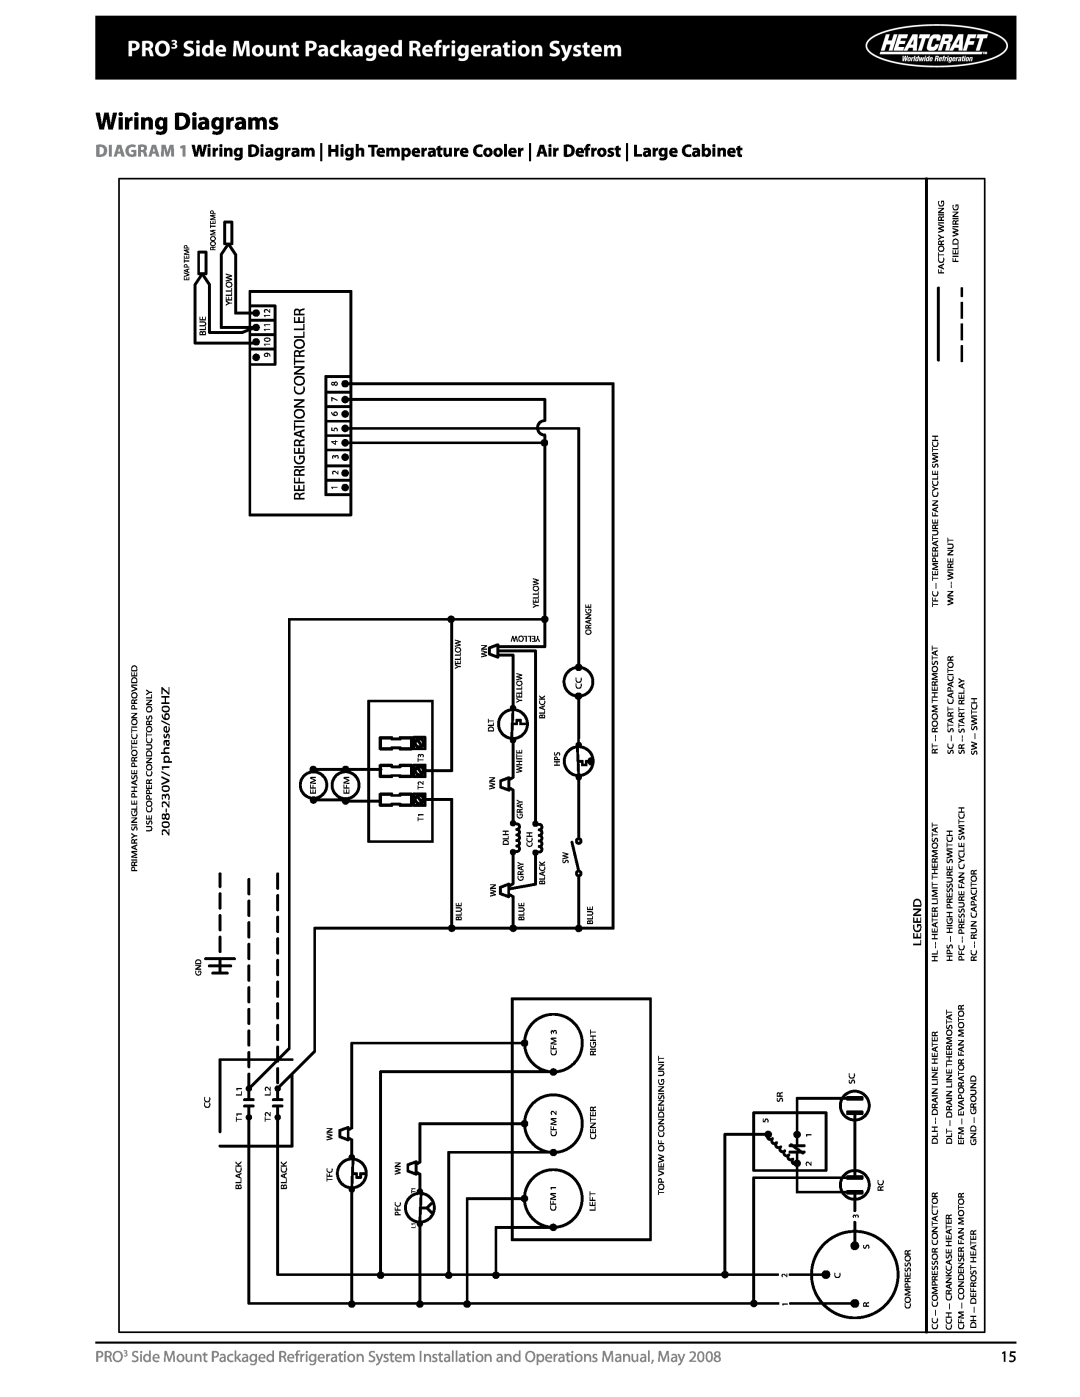 Heatcraft Refrigeration Products manual Wiring Diagrams, PRO3 Side Mount Packaged Refrigeration System 